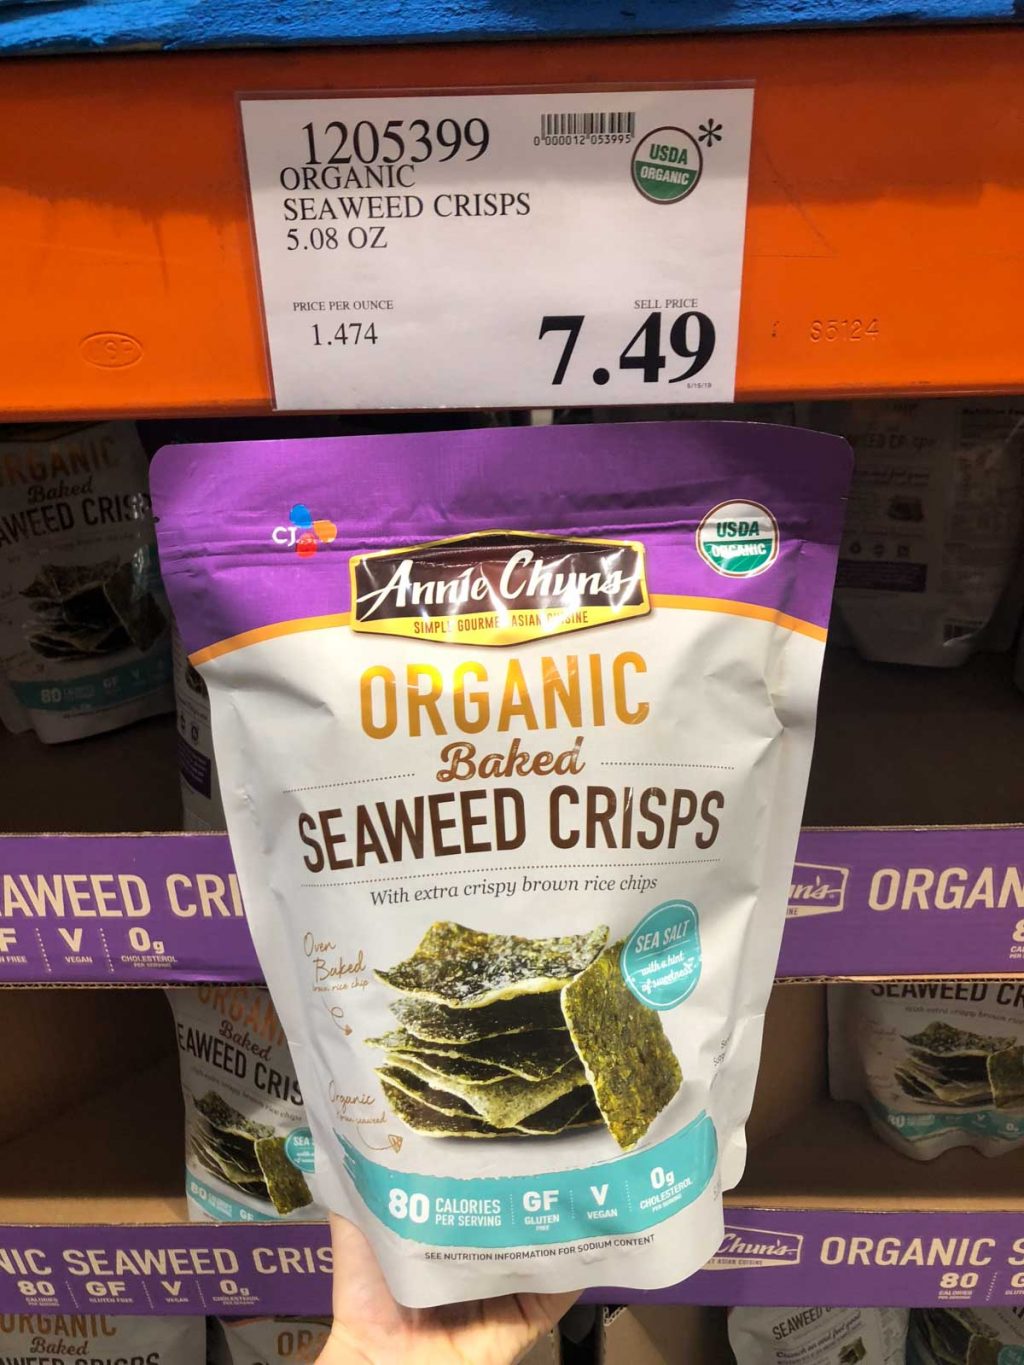 A hand holding a bag of organic baked seaweed crisps for $7.49 at Costco.